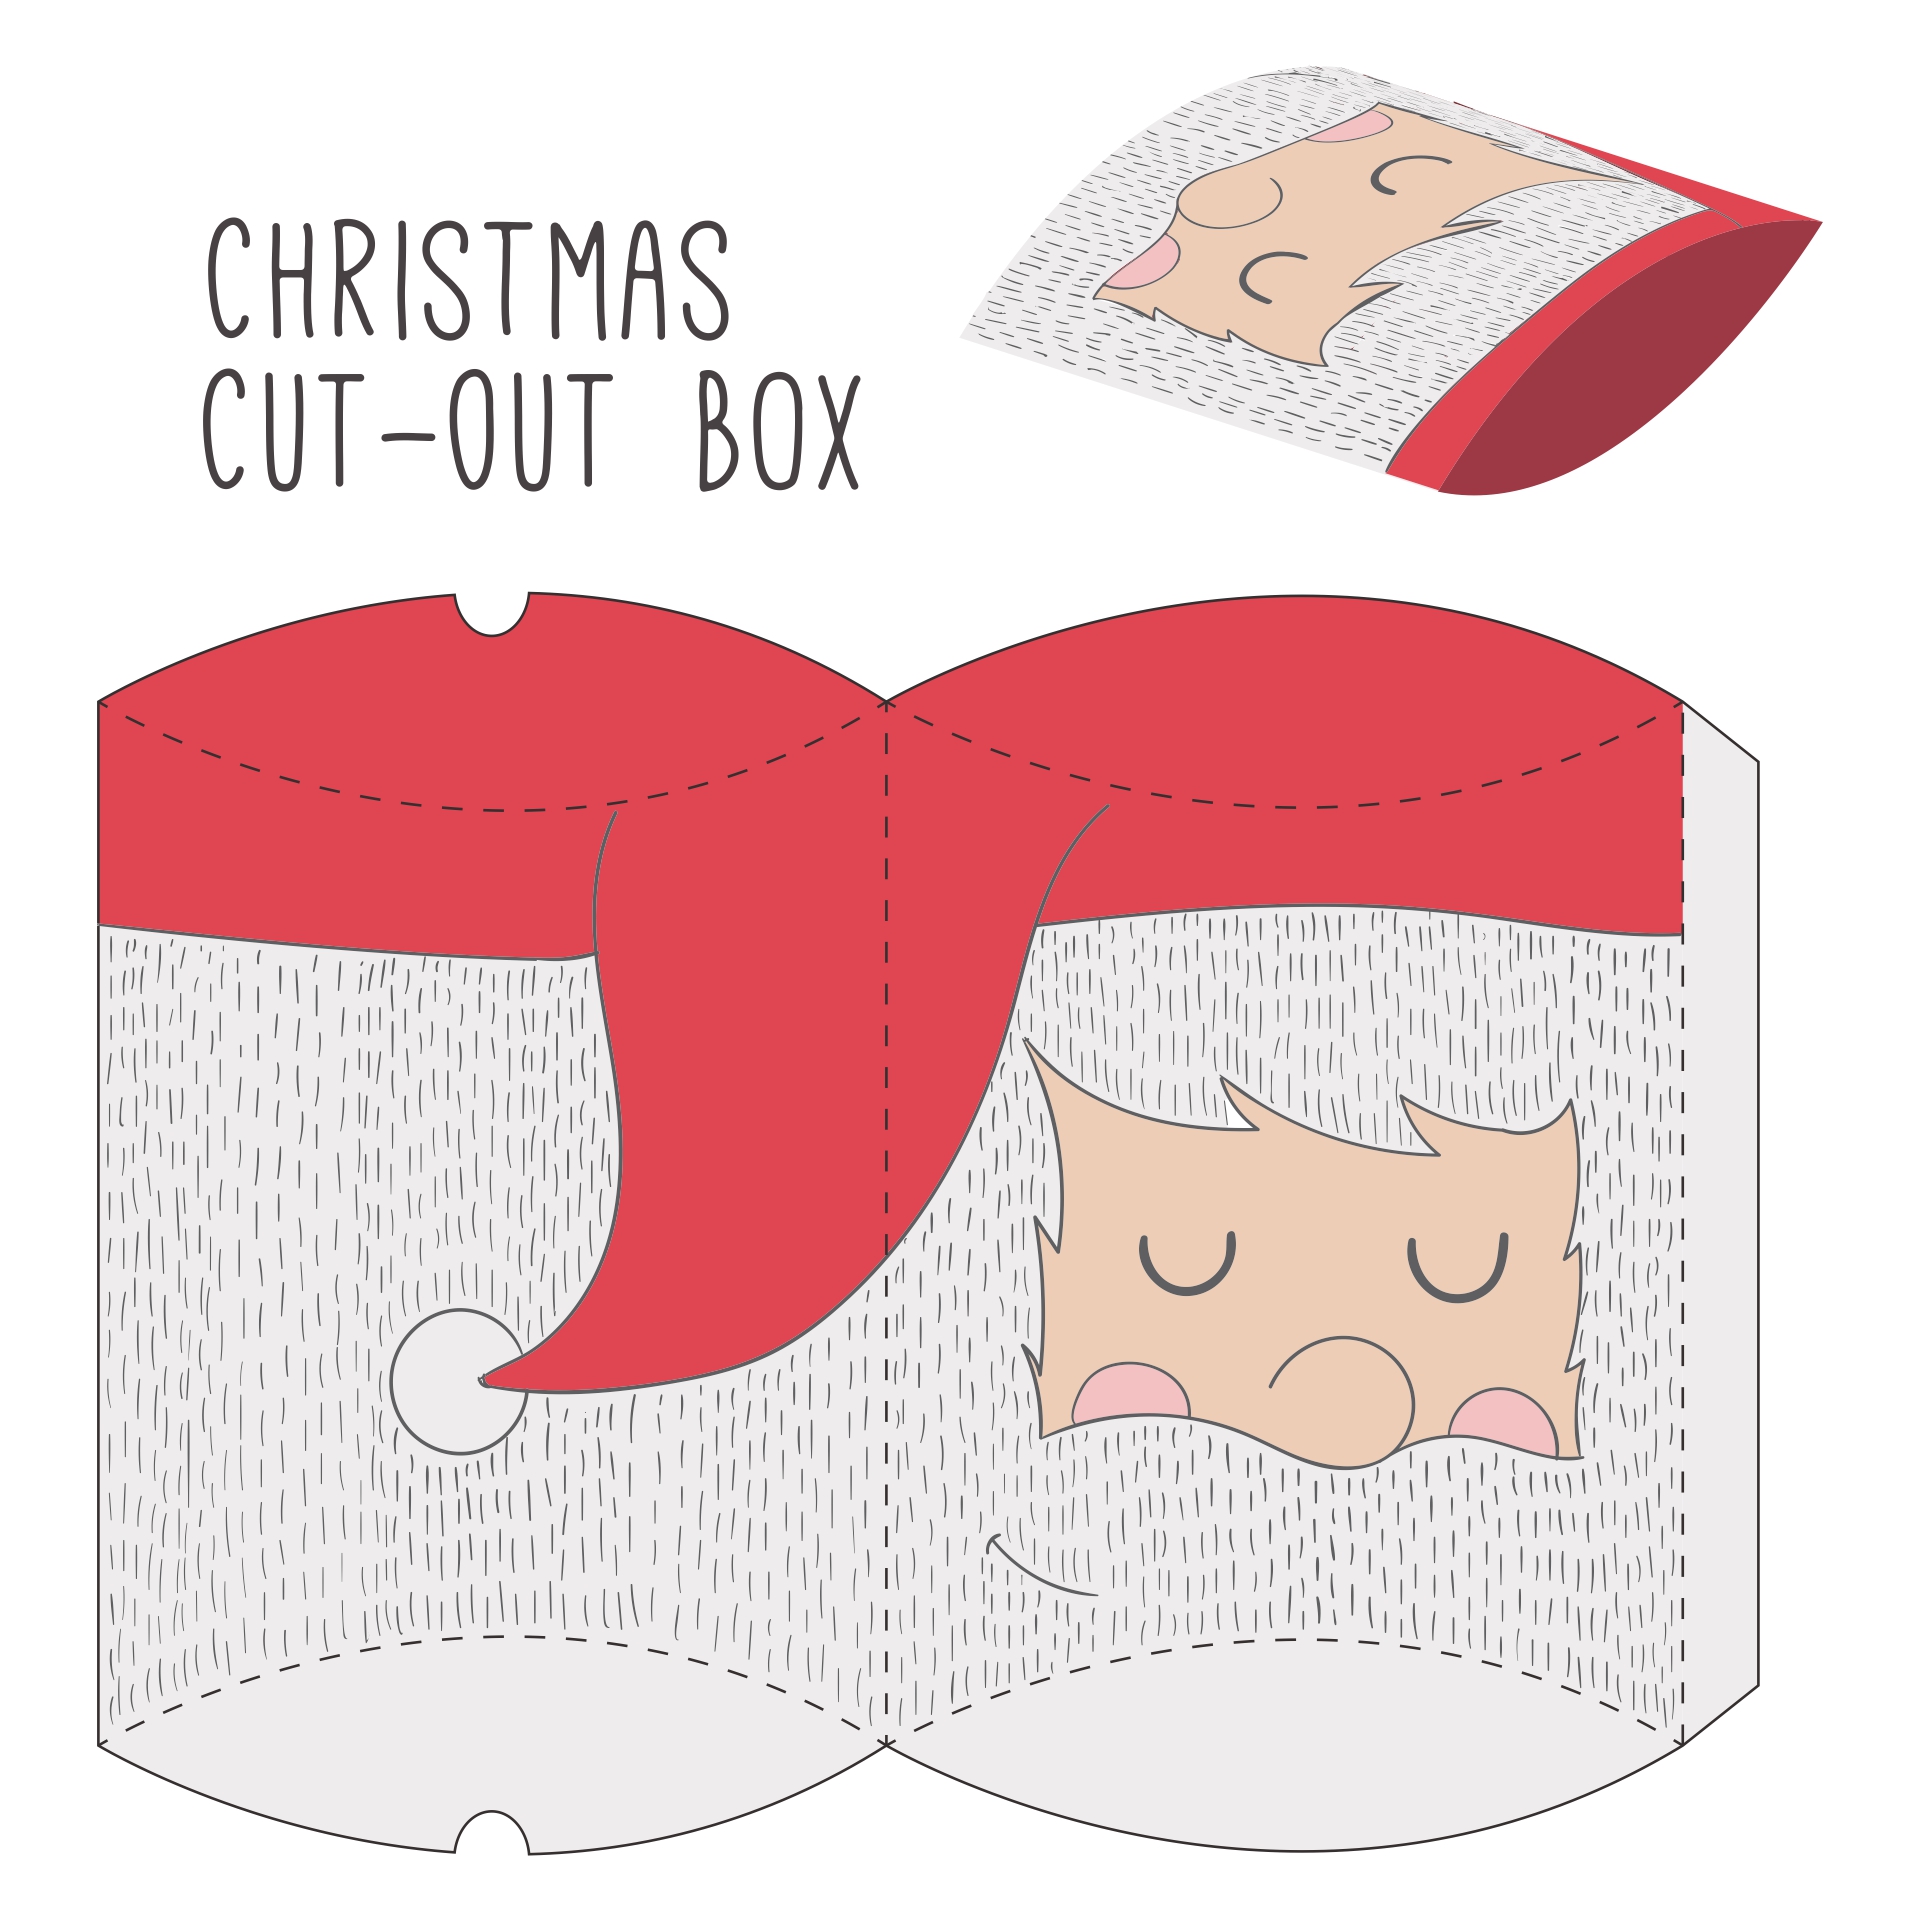 6 Best Images of Christmas Santa Printable Paper Box Templates - Free ...